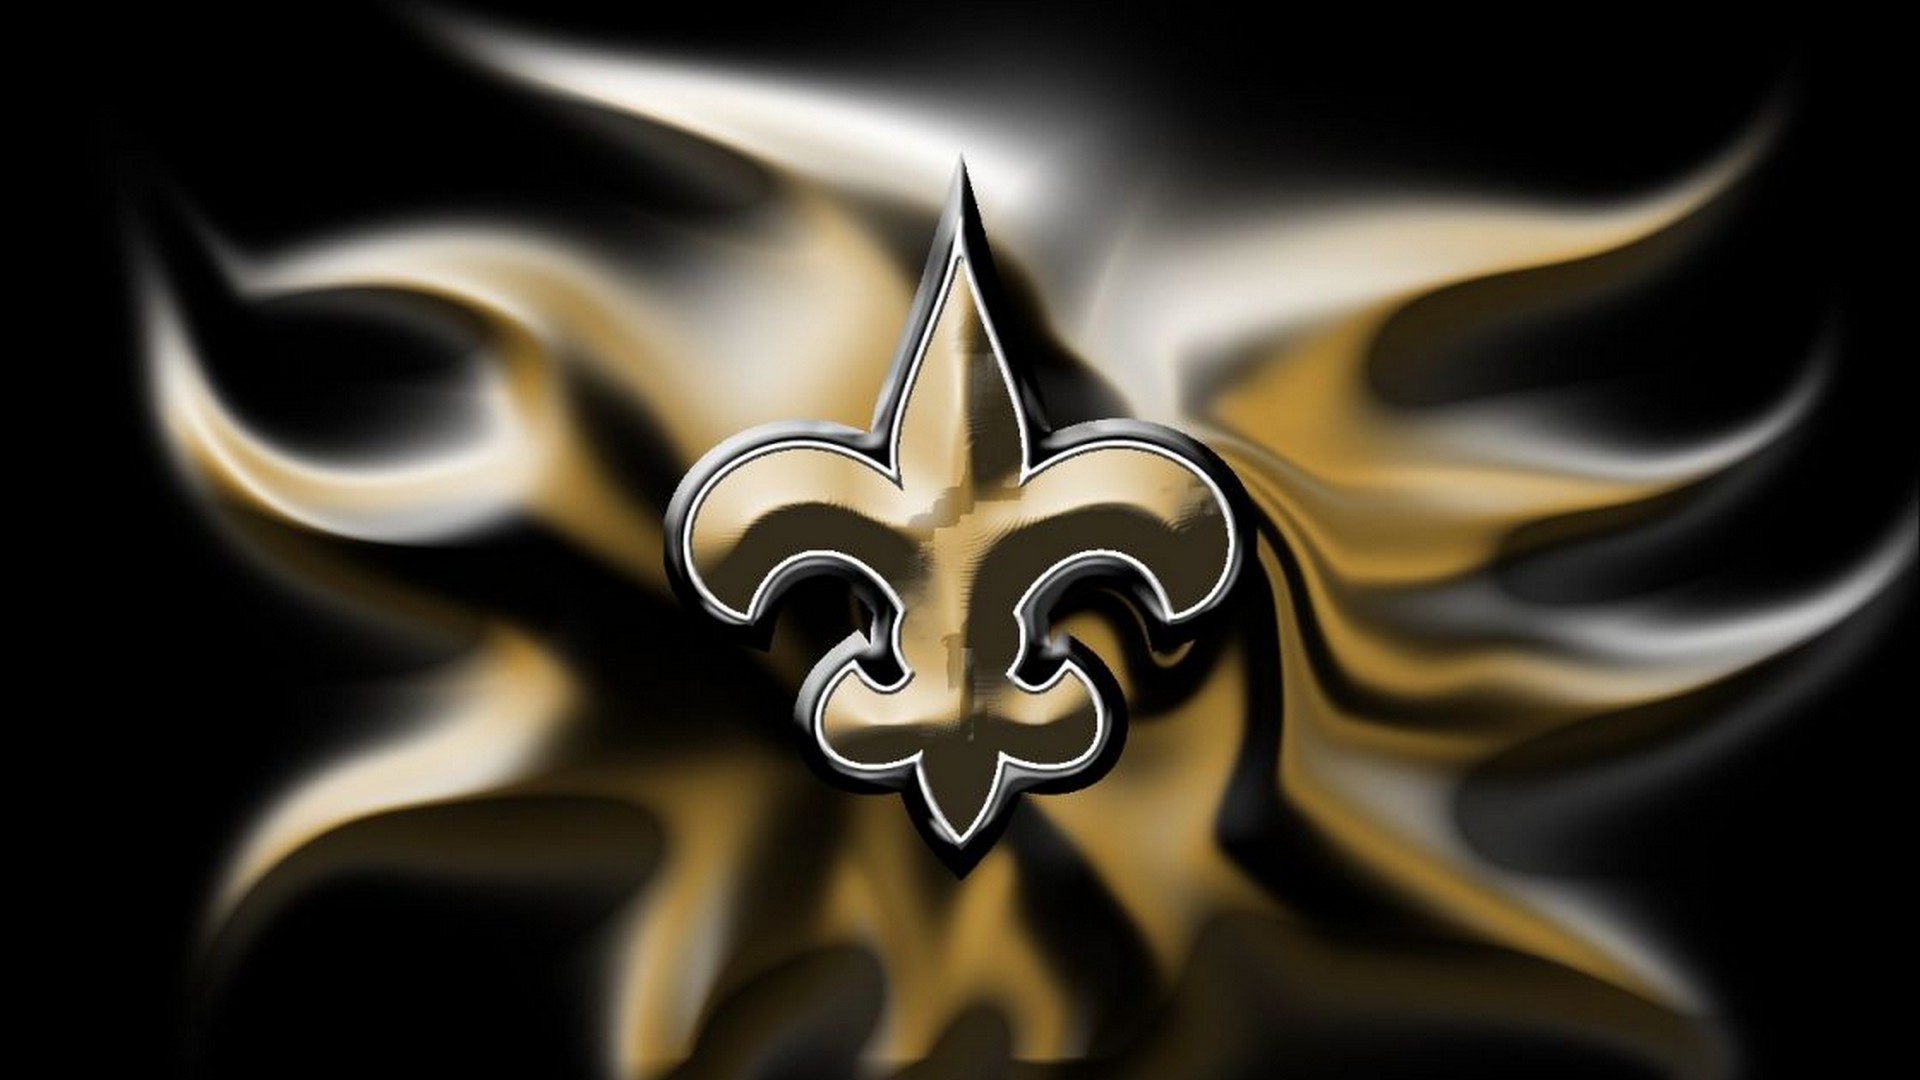 HD New Orleans Saints NFL Backgrounds With Resolution 1920X1080 pixel. You can make this wallpaper for your Mac or Windows Desktop Background, iPhone, Android or Tablet and another Smartphone device for free